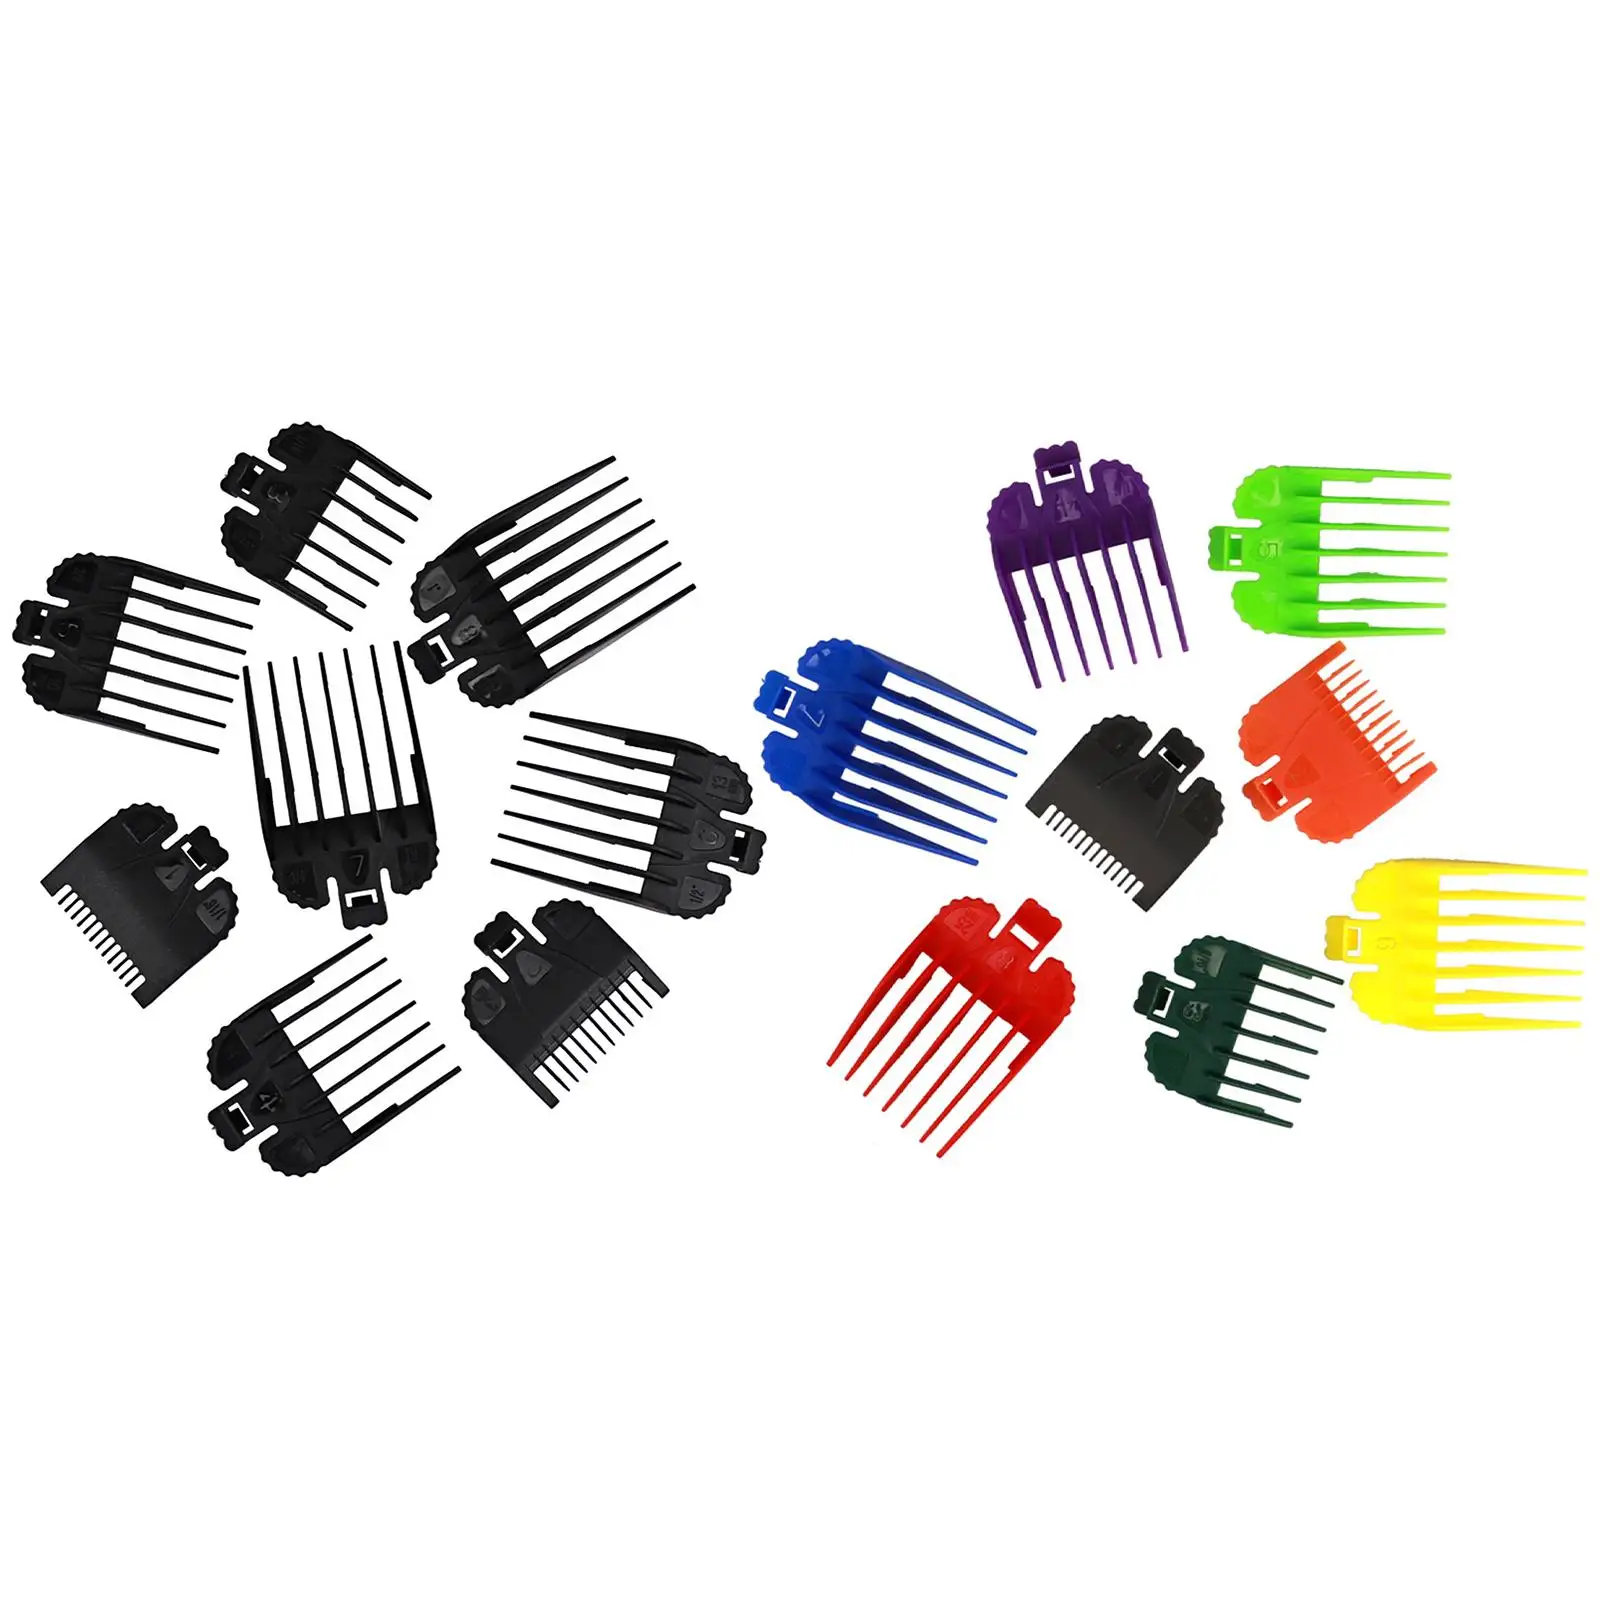 8 Piece/Set Professional Clipper Guide Combs Hair Trimmers Hair Guard Attachment 1.5mm 3mm 4.5mm 6mm 10mm 13mm 19mm 25mm